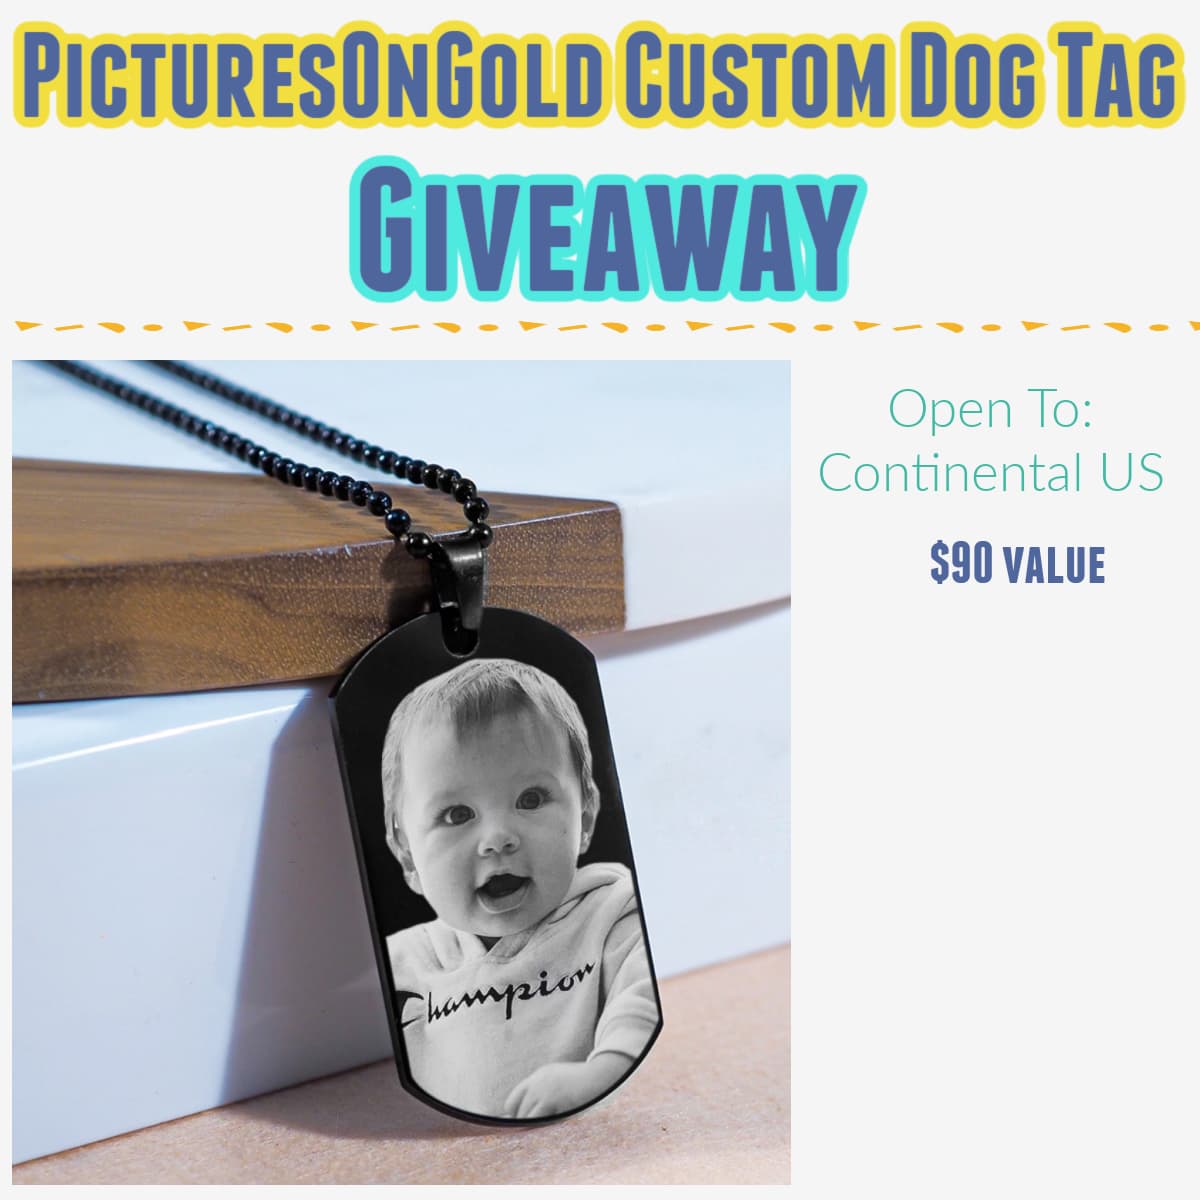 Pictures On Gold Custom Dog Tag Review + Giveaway